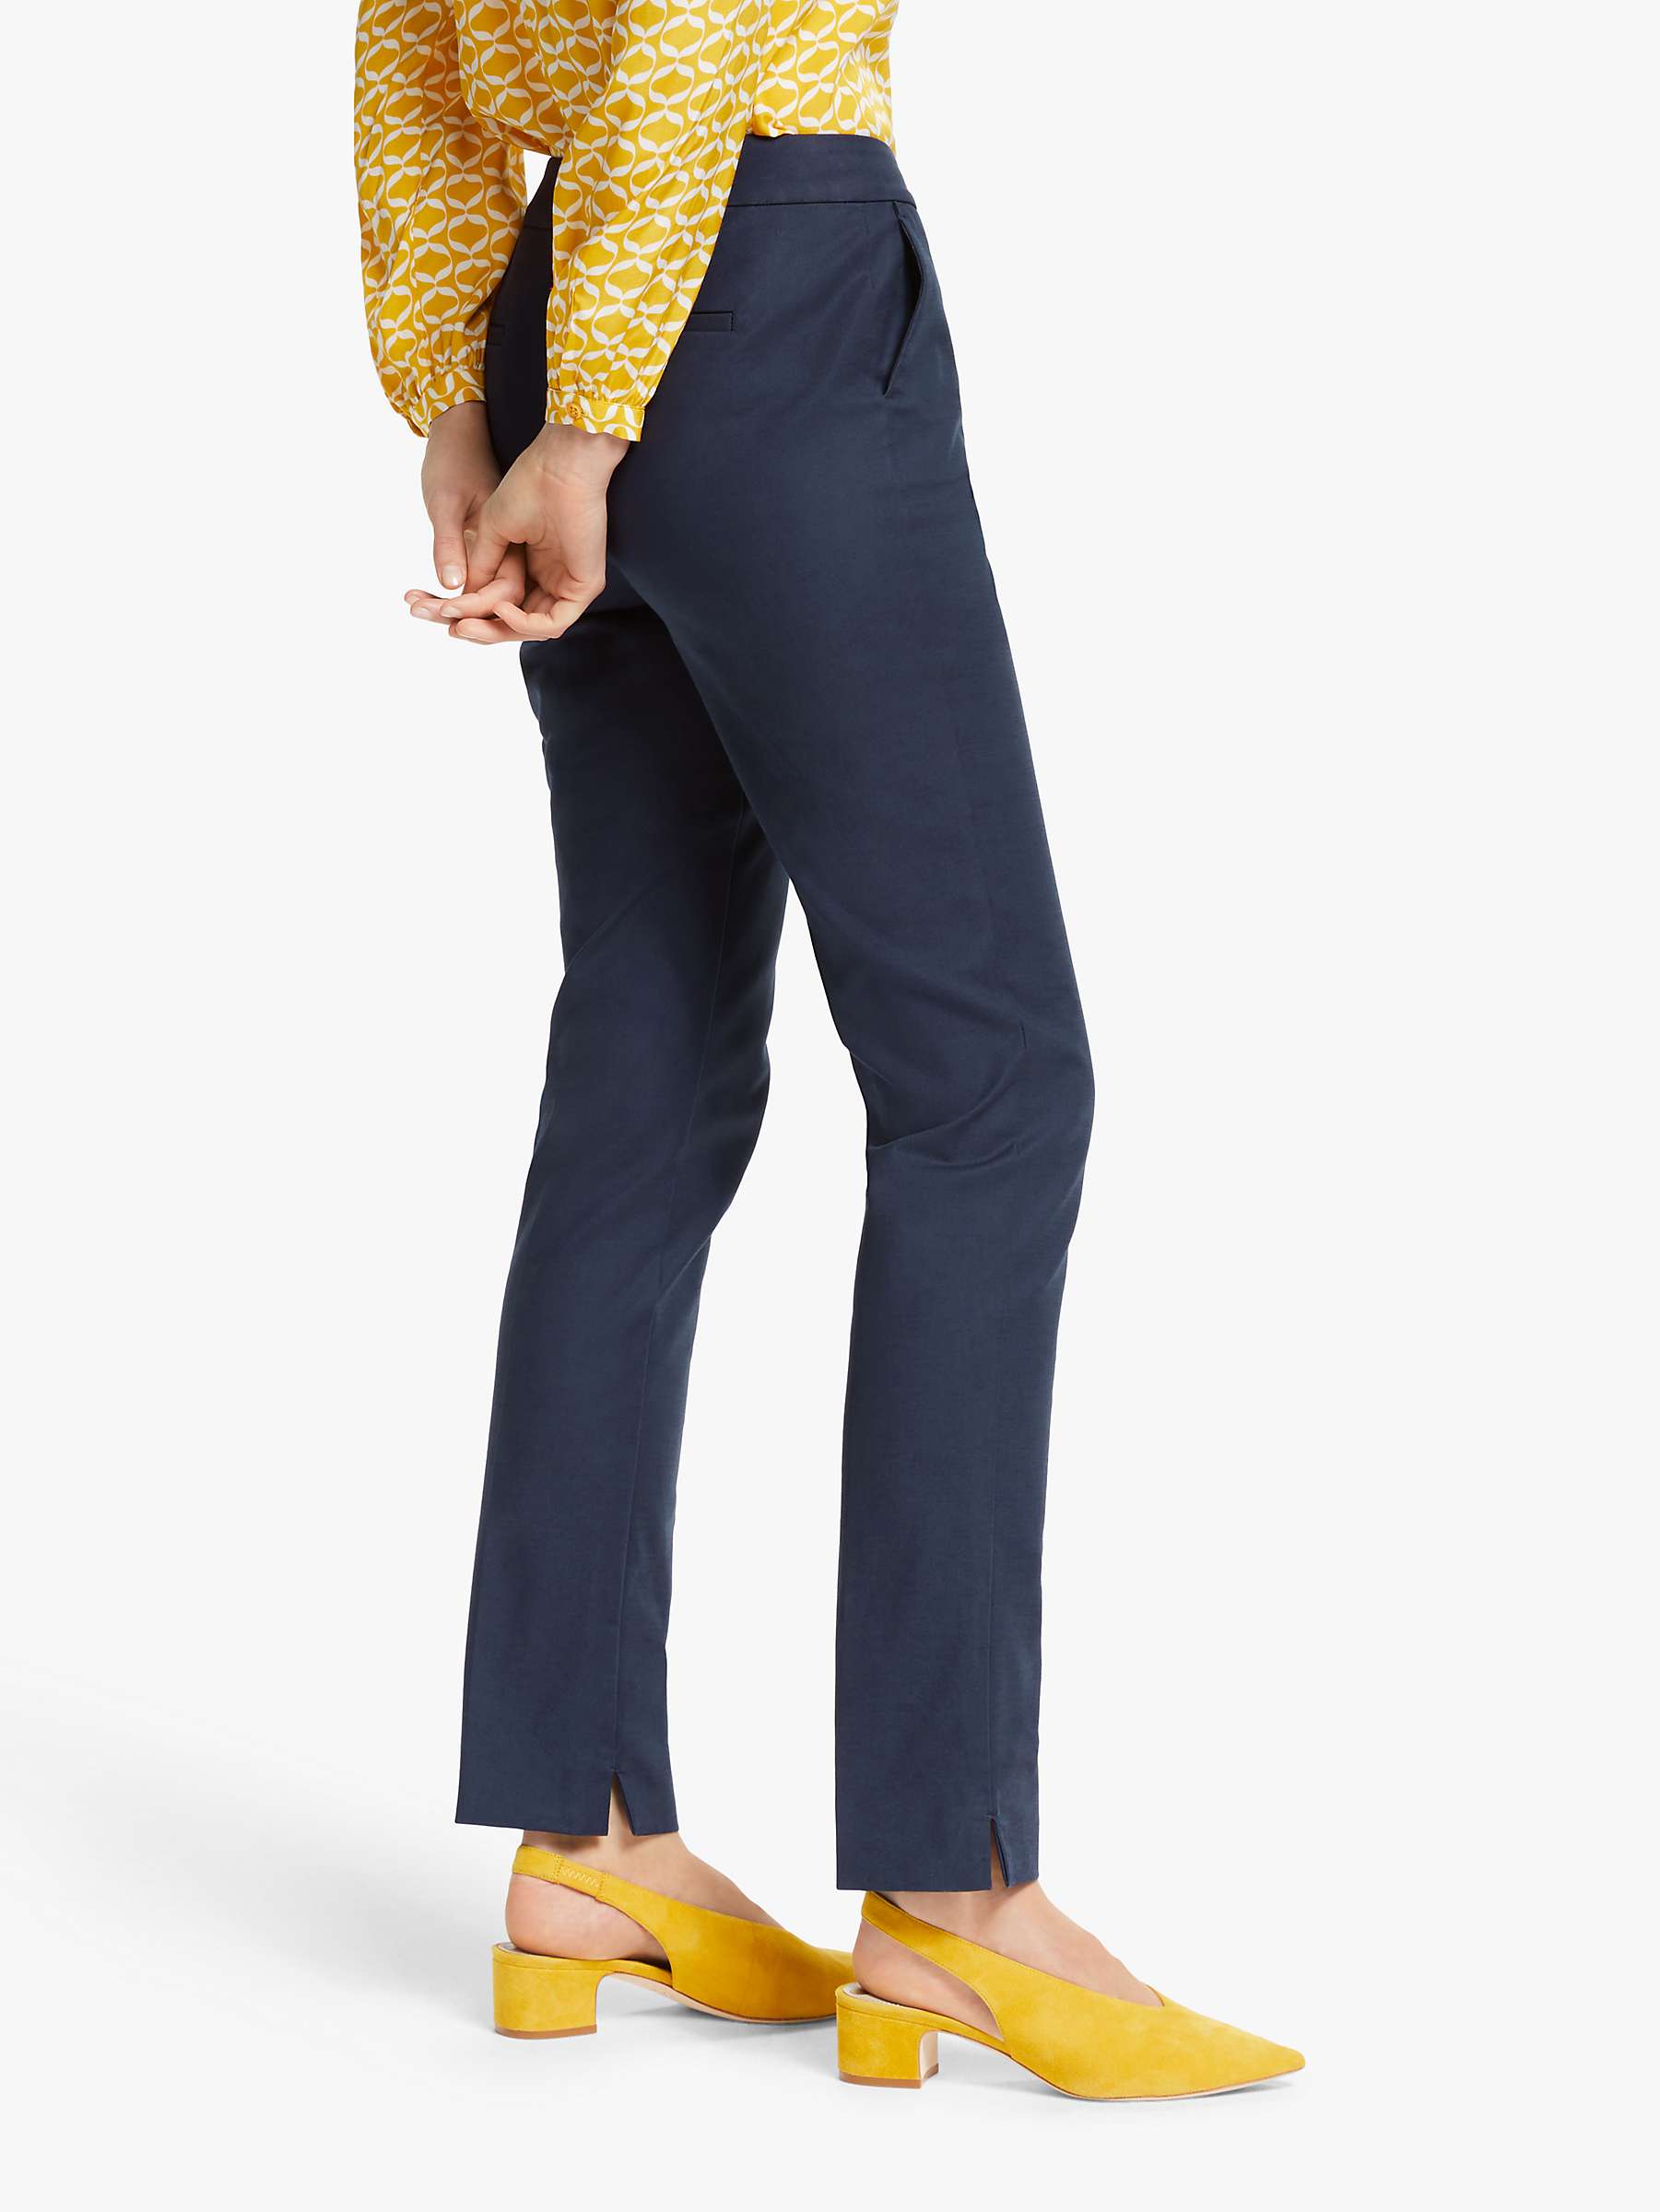 Boden Cotton Richmond 7/8 Trousers in Navy Womens Clothing Trousers Blue Slacks and Chinos Full-length trousers 